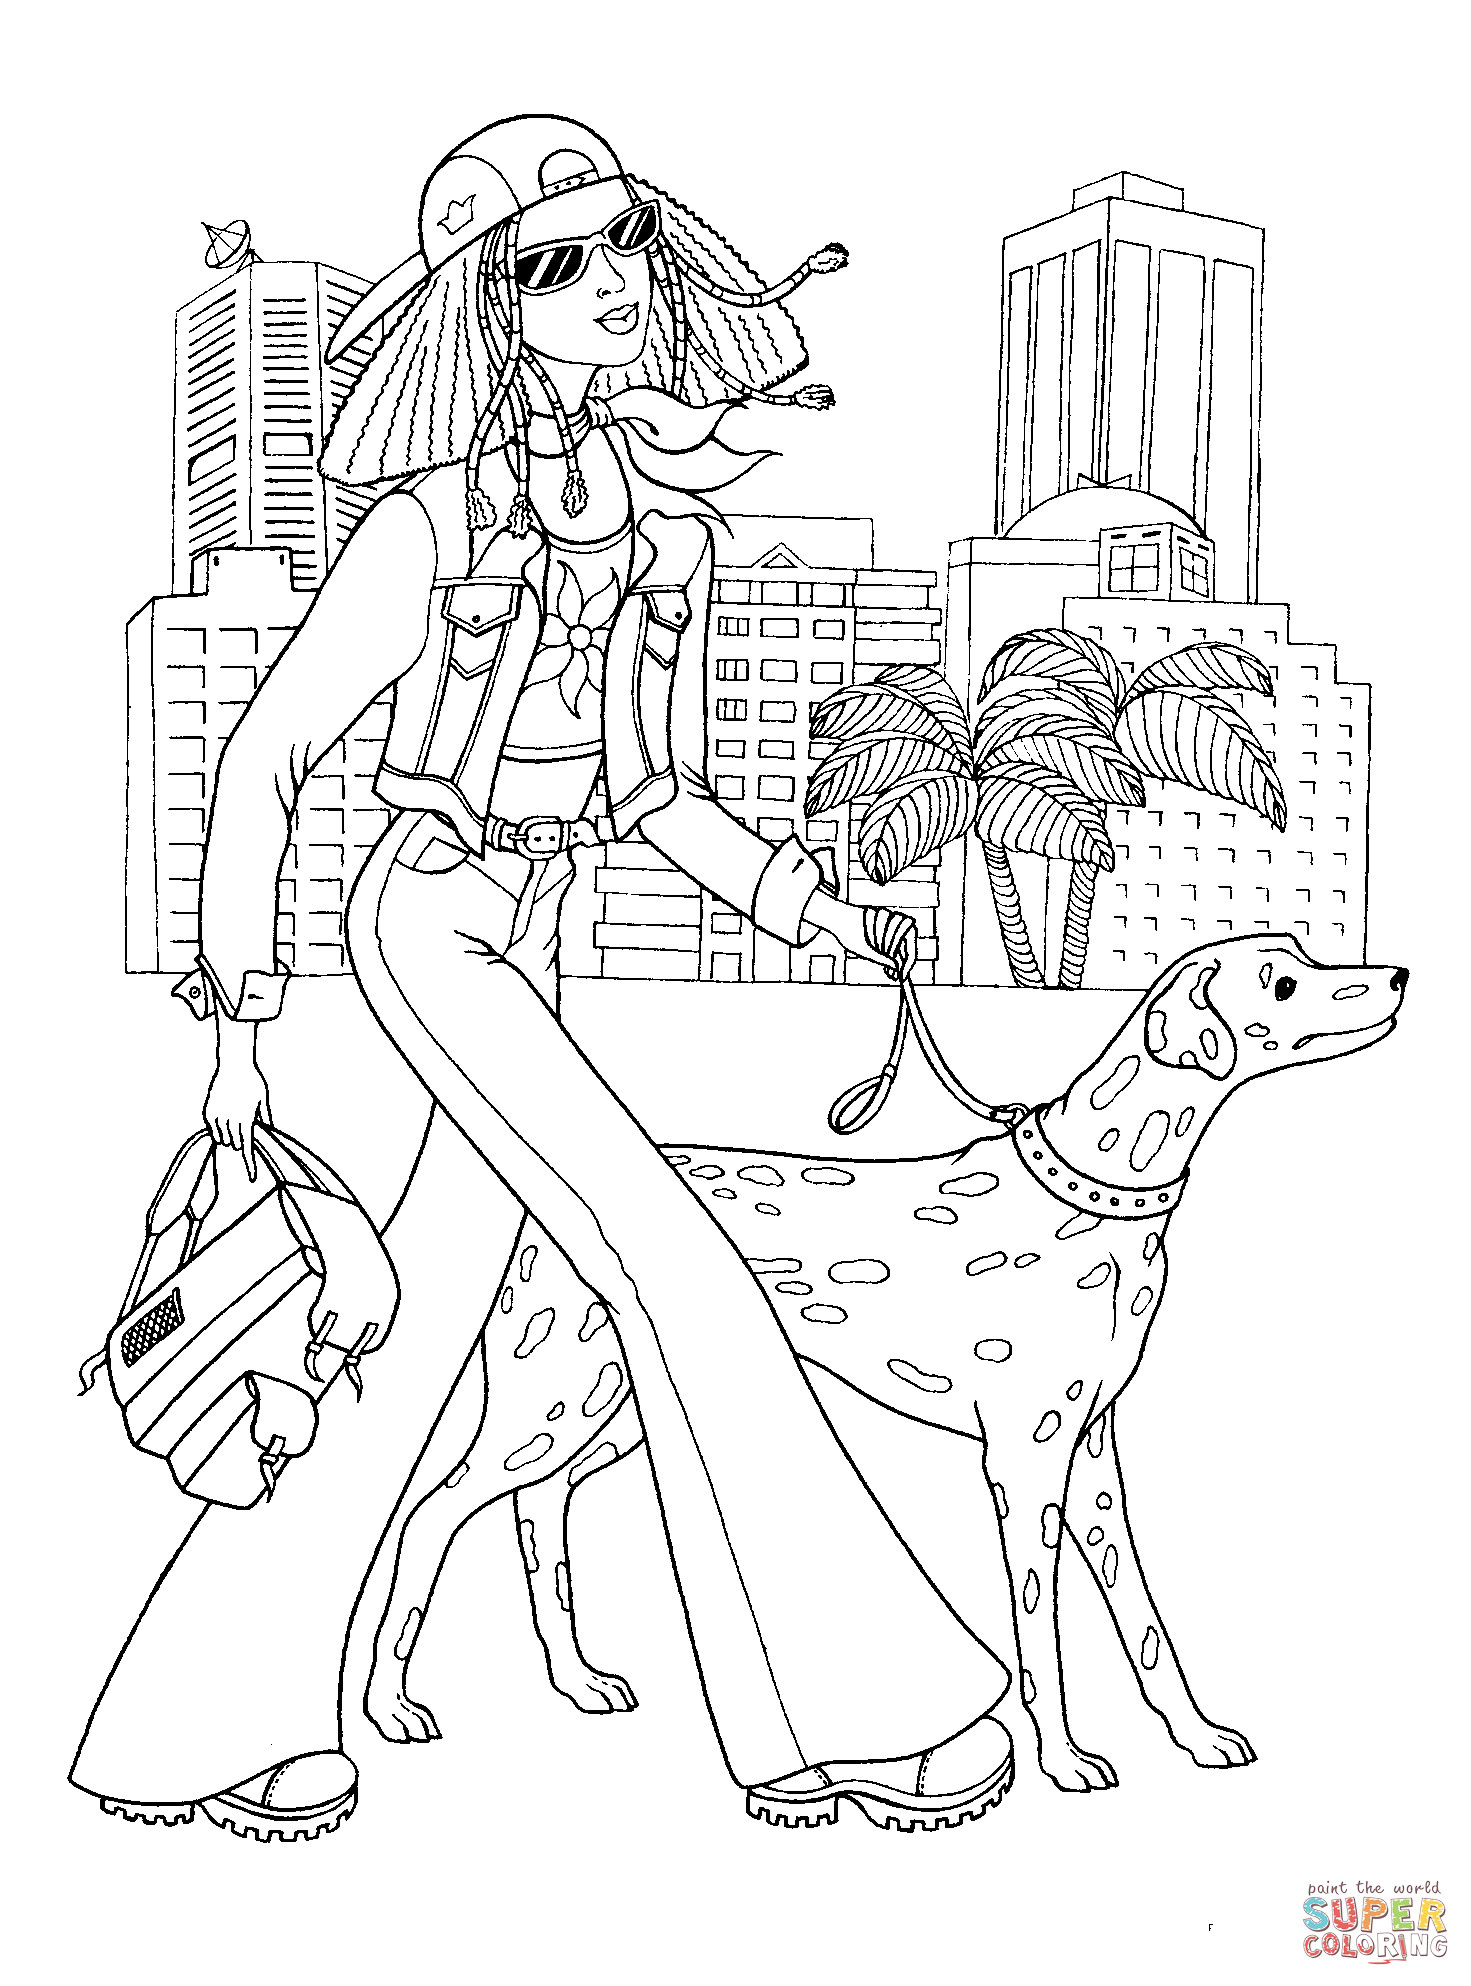 Coloring Sheets For Teenage Girls
 Teenager Fashion coloring page